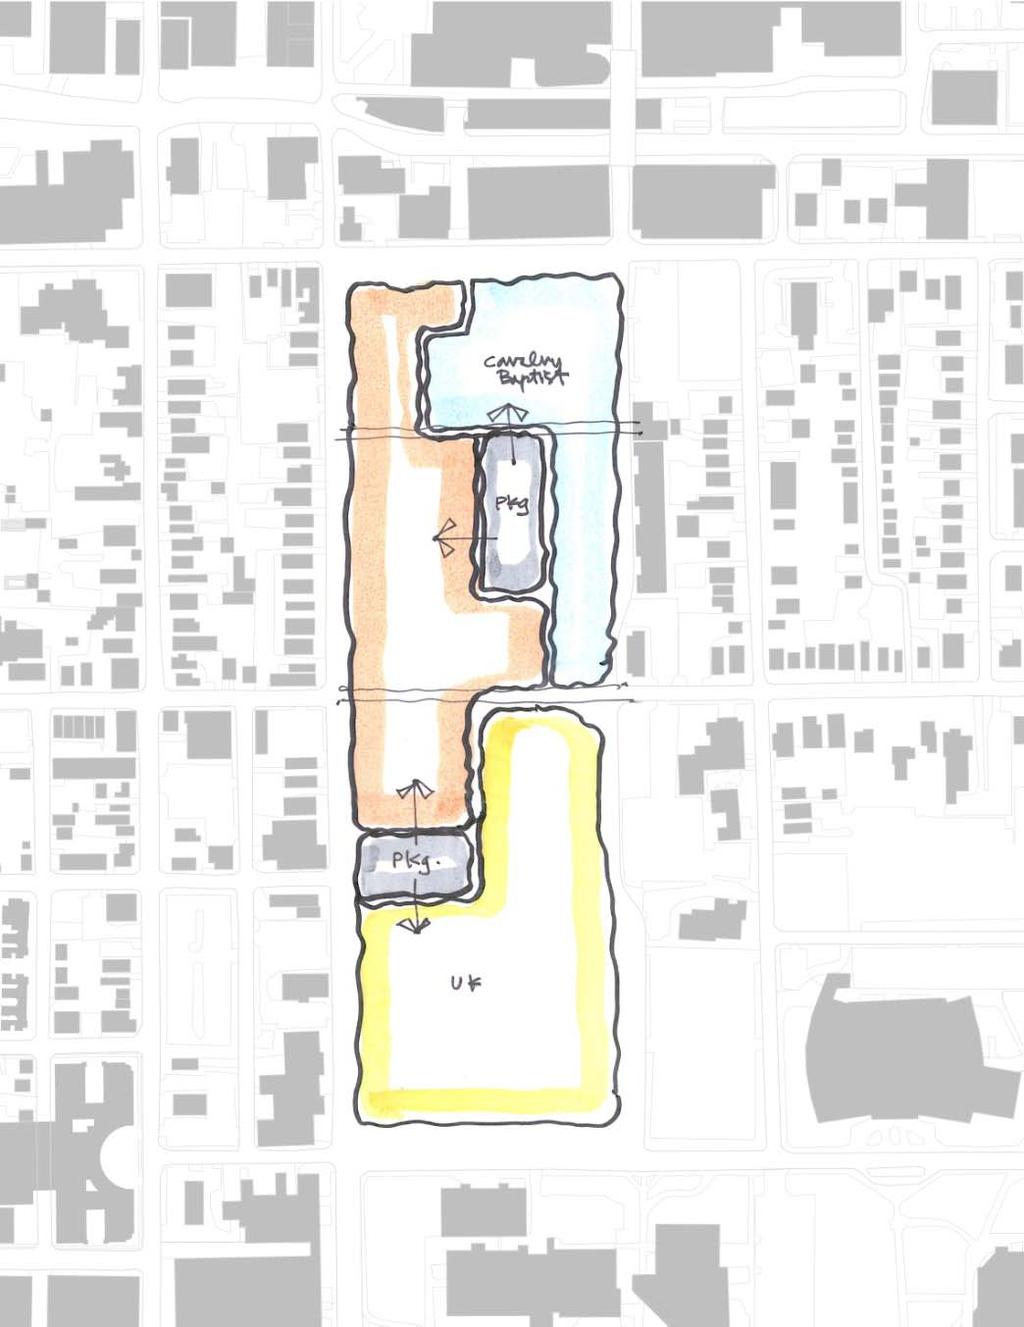 Option 3 Land use Locating the garage in the center of the block conceals it from the public realm of the street.